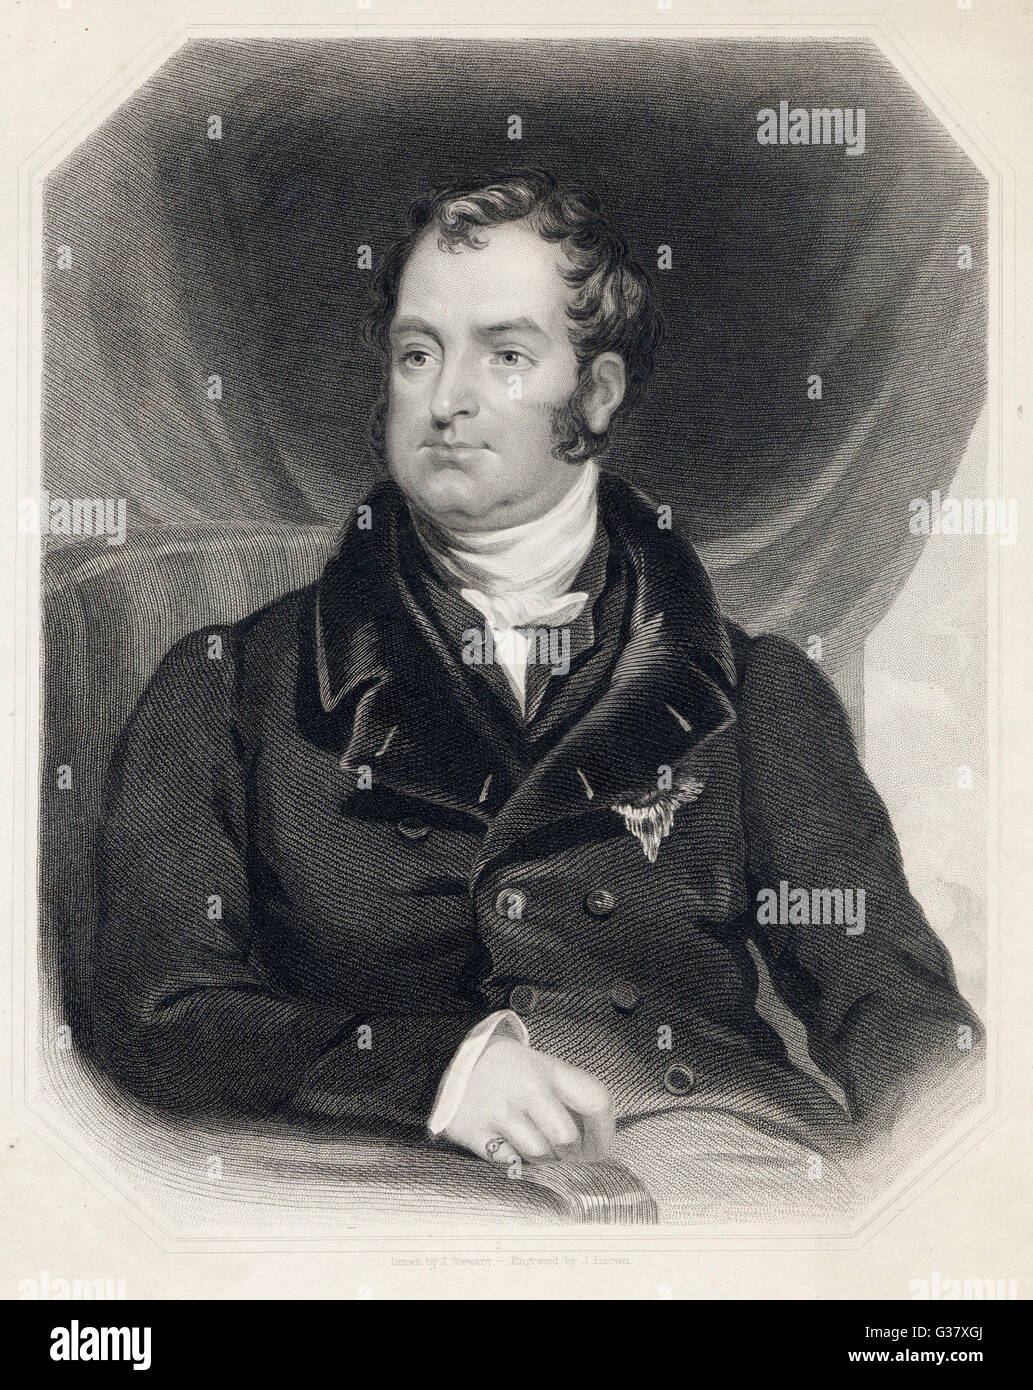 JOHN CHARLES SPENCER, third  earl SPENCER ; previously  viscount ALTHORP. Statesman  who despite his preference for  country pursuits pursued a  valuable political career.     Date: 1782 - 1845 Stock Photo